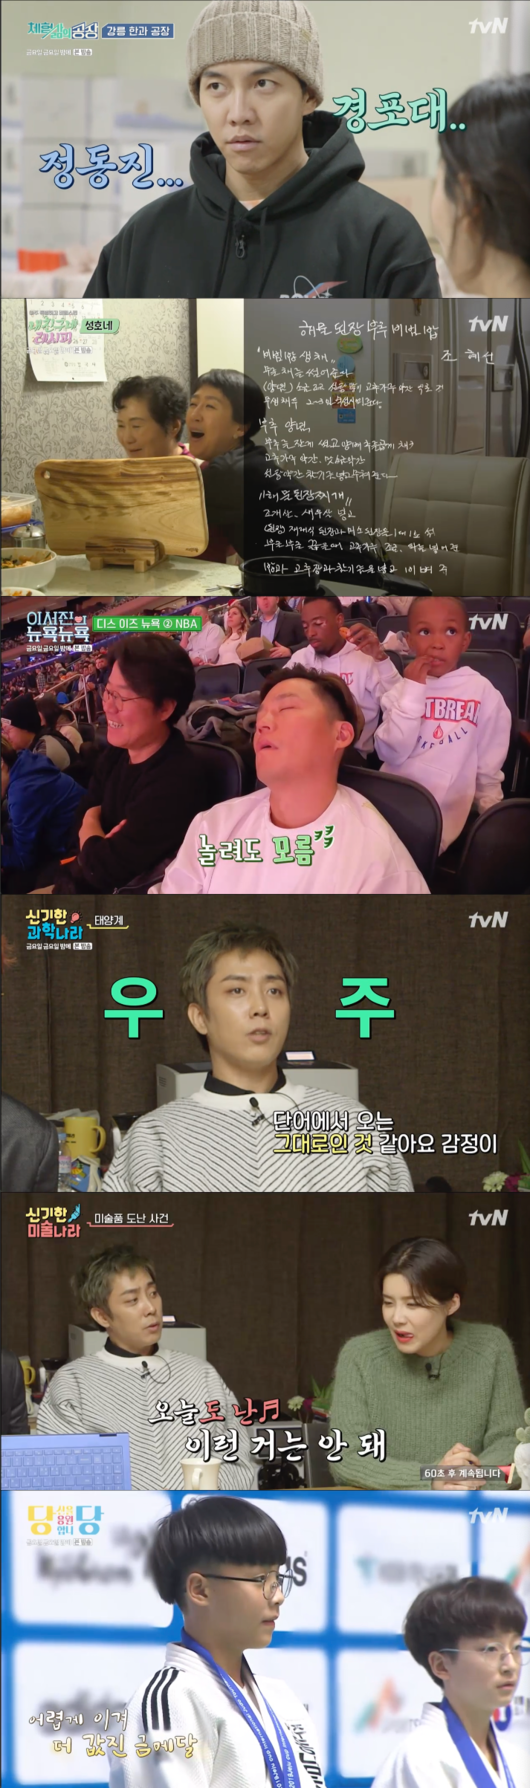 Friday night doubled the impression and fun of labor, cooking, travel, science, art and sports.Lee Seung-gi, Eun Ji-won, Lee Seo-jin, Jin-kyeong Hong, Song Min-ho, and Jang Do-yeon delivered laughter and knowledge to the room.Lee Seung-gi visited the Hangu village in Sacheon-myeon, Gangneung following the Cockyak factory in the second episode of TVN Friday night, which was broadcast on the 17th.There he helped to make milk and fried rice made from glutinous rice, foundation, graining, antiques, garnishing, packaging, and so on.Lee Seung-gi, who had made the initial mistake, said, Im more nervous than the year-end awards ceremony. All of the employees were ready to send a love call to work together.But after lunch, I started packing, and the boss and his wife were confused.Lee Seung-gi said, I was so unskilled that I tried hard. Ive never known how carefully Han-gwa is made. Ill order Han-gwa for dessert.I learned about Han-gu, about us. Han-gu was fine. I dried it when I packed it. I overlooked the service.He was beaten by 42 minutes, but he was defeated by a reverse.Jin-kyeong Hong went to the house of comedian Yoon Sung-ho for My Friends Recipe. His mother was a hand-flavored craftsman who ran a famous white house in Yeouido Securities.The food that Jin-kyeong Hong would learn was seafood miso chu bibimbap, which was also sold as a menu.After a delicious taste, Jin-kyeong Hong also headed to the kitchen, where he got a recipe from making uncut vegetables to making leek sauce and boiling seafood miso stew.He gave Yoon Sung-hos mother a gift of cutting boards and knife stand, and Yoon Sung-hos mother laughed at the listeners with a shambling chanson saying, I went to France and Paris fell into makgeolli.In Lee Seo-jins New York, Lee Seo-jin had lunch in Chinatown and then went to the Bibikyu restaurant to eat the right United States of America.The only favorite United States of America food is lip, and Chicken and barbecue lip, wing, margarita, and cowlslow.But the sheep and size were enormous. Lee Seo-jin said, Im sick of this country from the beginning. Slowly adapt.Where is this chicken? I think it was when I spread the wings. It is bigger than the legs. I have to hold it by hand, but I can not eat it. Lee Seo-jin, who finished the meal, went to see United States of America professional basketball Kyonggi with Na Young-seok.The Kyonggi chapter in Madison Square Garden was full of heat and shouts, but Lee Seo-jin, who had less time lag adaptation, fell asleep in the middle of Kyonggi.Waking up at the end of Kyonggi, he looked fabulous, but he laughed even more shyly as he held his T-shirt Gift in his hand.In the section of the Science Country, we talked about stars and universes. As of 2015, there are a trillion Eunha observed.One of them is the Sun. Voyager 2 exploration rocket. It has a metal Elpipan. It contains Earths photographs, languages, and songs.I dont know what Aliens language is, so Ive marked it in binary form. Theres a way to decipher it.I dont want to describe Alien as an alien, Im sure its 100% alien, said Eun Ji-won, who said, but Im not sure its a alien life.We should exclude Mercury. Its hot because its close to the sun. Venus has an average temperature of over 400 degrees.The universe is the universe, explained Eun Ji-won, who smiled, and if you have children, you want to name it as a silver universe.In the novel Art Country, the talk of theft continued: the Mona Lisa was lost at the Louvre in 1911. Professor Yang Jung-moo said, I just went in white and hid it in my clothes.He was caught in Italy Florence in two years. Italy was a thief, but he was originally a national hero because he brought it.He was released six months after being sentenced to one year.In 1994, a thief stole Munchs scream. Even this work was stolen ten years later in 2004. The thief left a note saying that he was grateful for the poor security.Eun Ji-won laughed at the wrong way, saying, Is this class a way to steal?The dictator Alois Hitler was also an art pro-Donanah. Professor Yang Jung-moo said, Alois Hitler took the Jewish property and took the painting.We took five million points from all over Europe, Song Min-ho said. What about theft? We shouldnt do it.It is bad, Eun Ji-won said, singing Today I singed and gave fun to the end.In the last corner, Cheerful Hall of Justice, the Kyonggi of judo players from Southeast Cho in Jeju Island was included after the first episode.Fourth grader Lee Ji-won advanced to the round of 16 with a cool one-game win, and the womens Moon Ji-hyun also won the semi-finals in 14 seconds after the start of Kyonggi.Moon Ji-hyun, who also reached the final with a single-game win in the semi-finals, was also disappointed when Lee Ji-won met an Indonesian player and suffered the same skill twice.Instead, Moon Ji-hyun turned the early weakness and won a back-to-back bout with 13 seconds left to end the Kyonggi event.Moon Ji-hyun said, I want to go out to the Olympics and be the first to please my family.Friday night